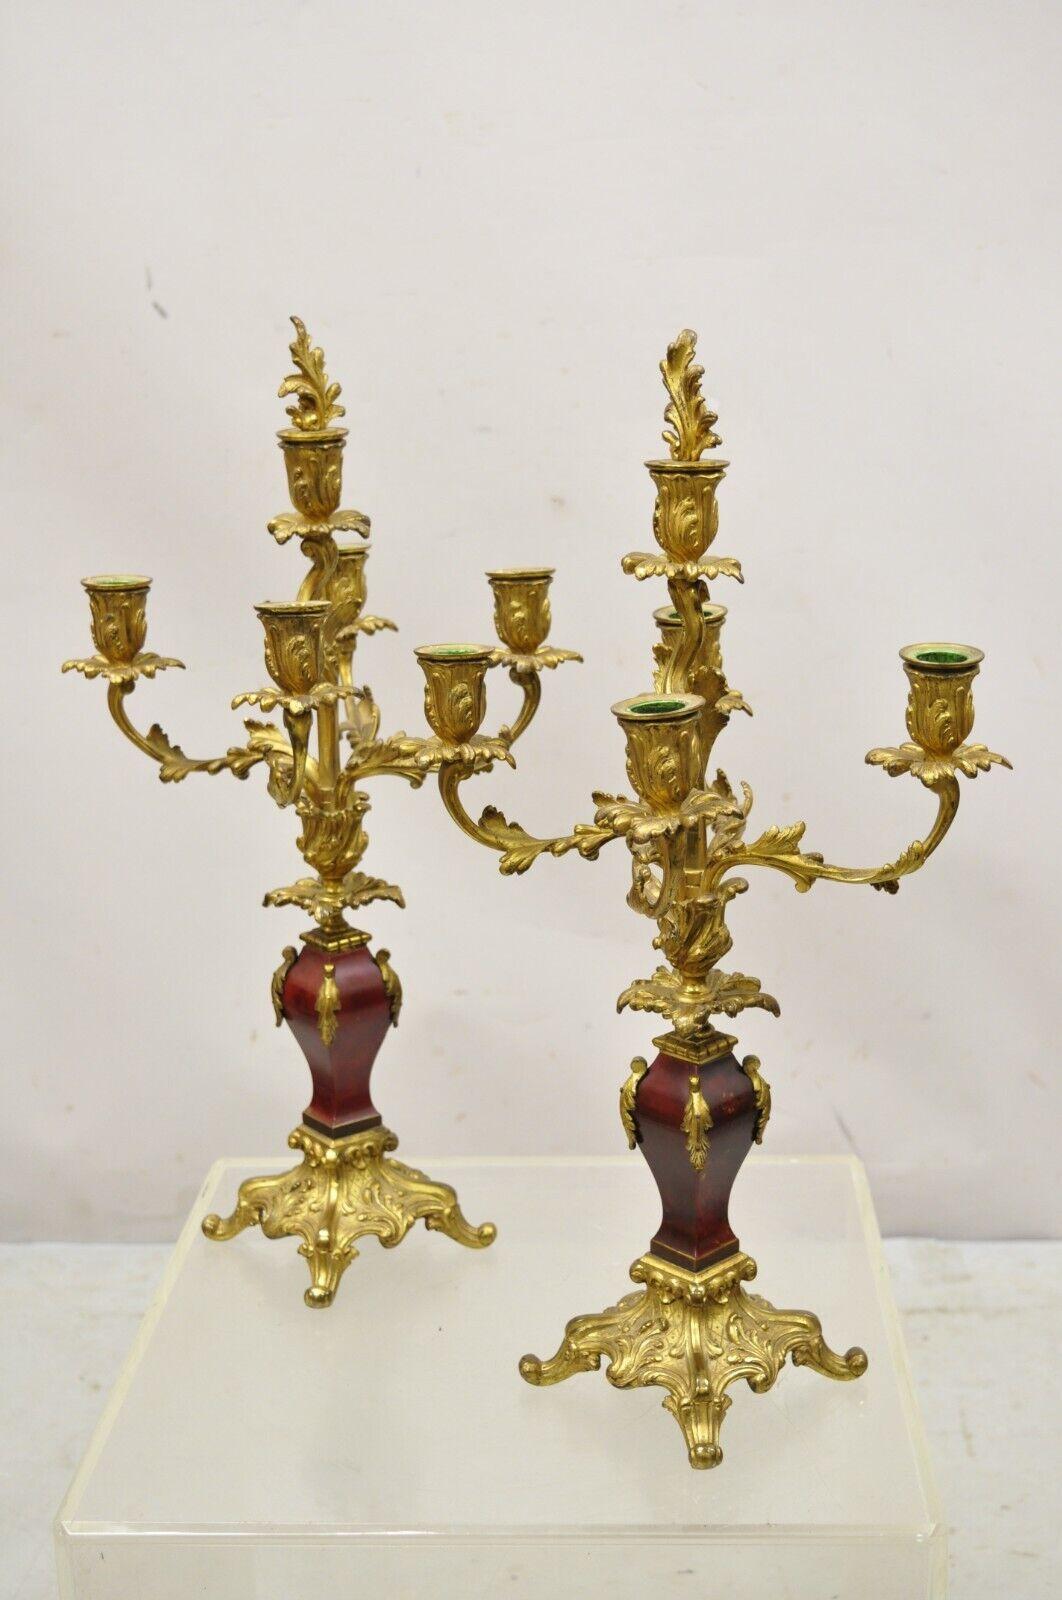 Antique French Louis XV Rococo style gold gilt bronze candelabras - a pair. Item featured includes removable flower finial snuffers, red painted faux marble shafts, very nice antique pair, quality French craftsmanship. circa 1900. Measurements: